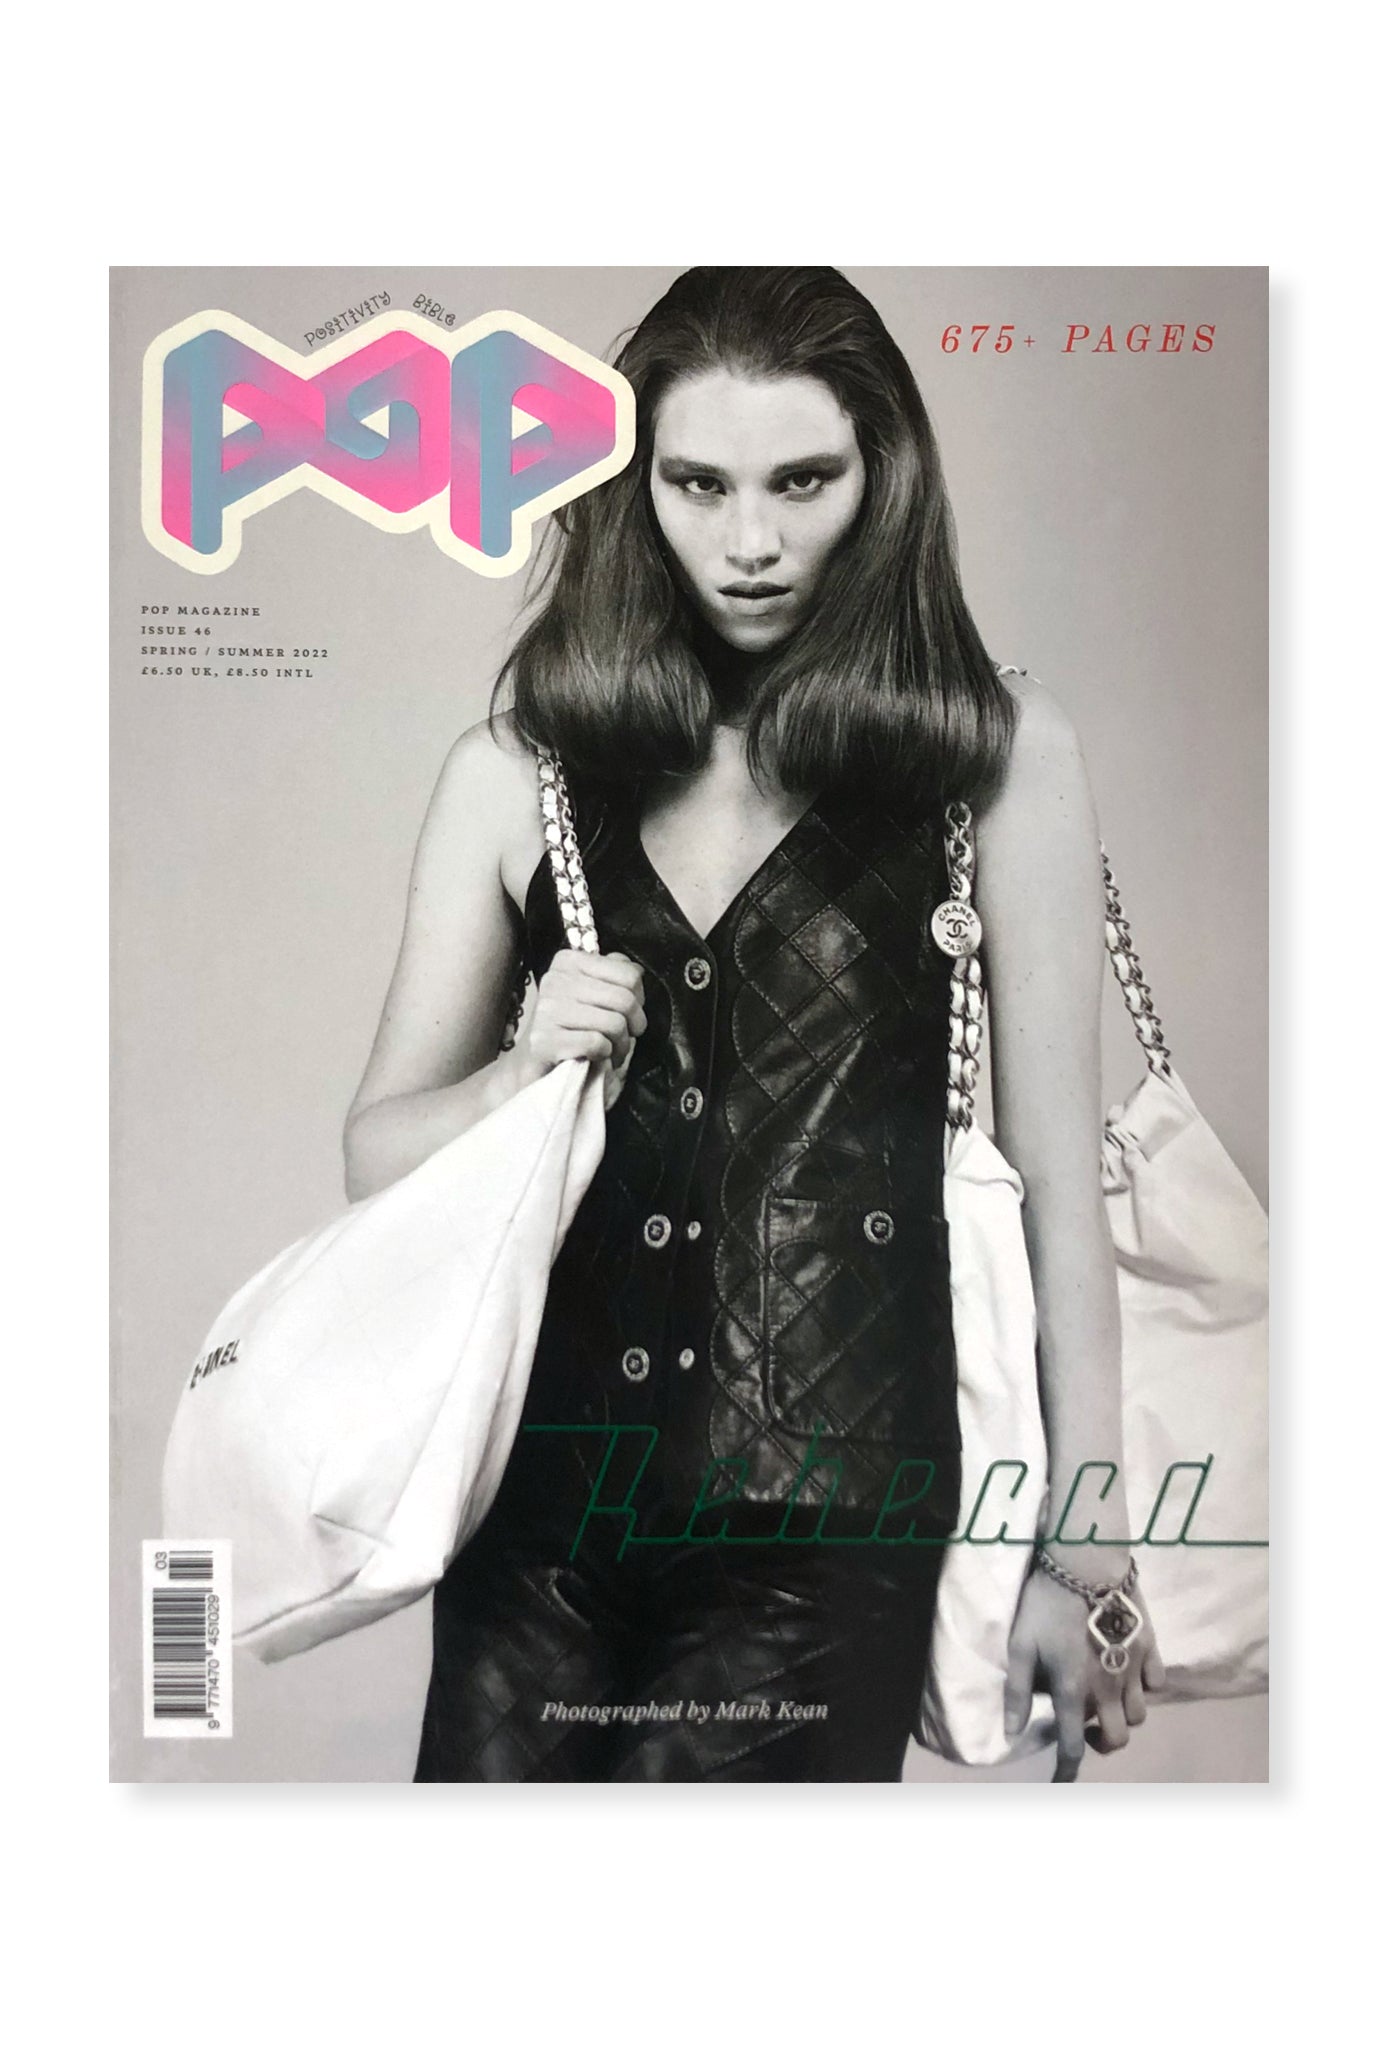 POP, Issue 46